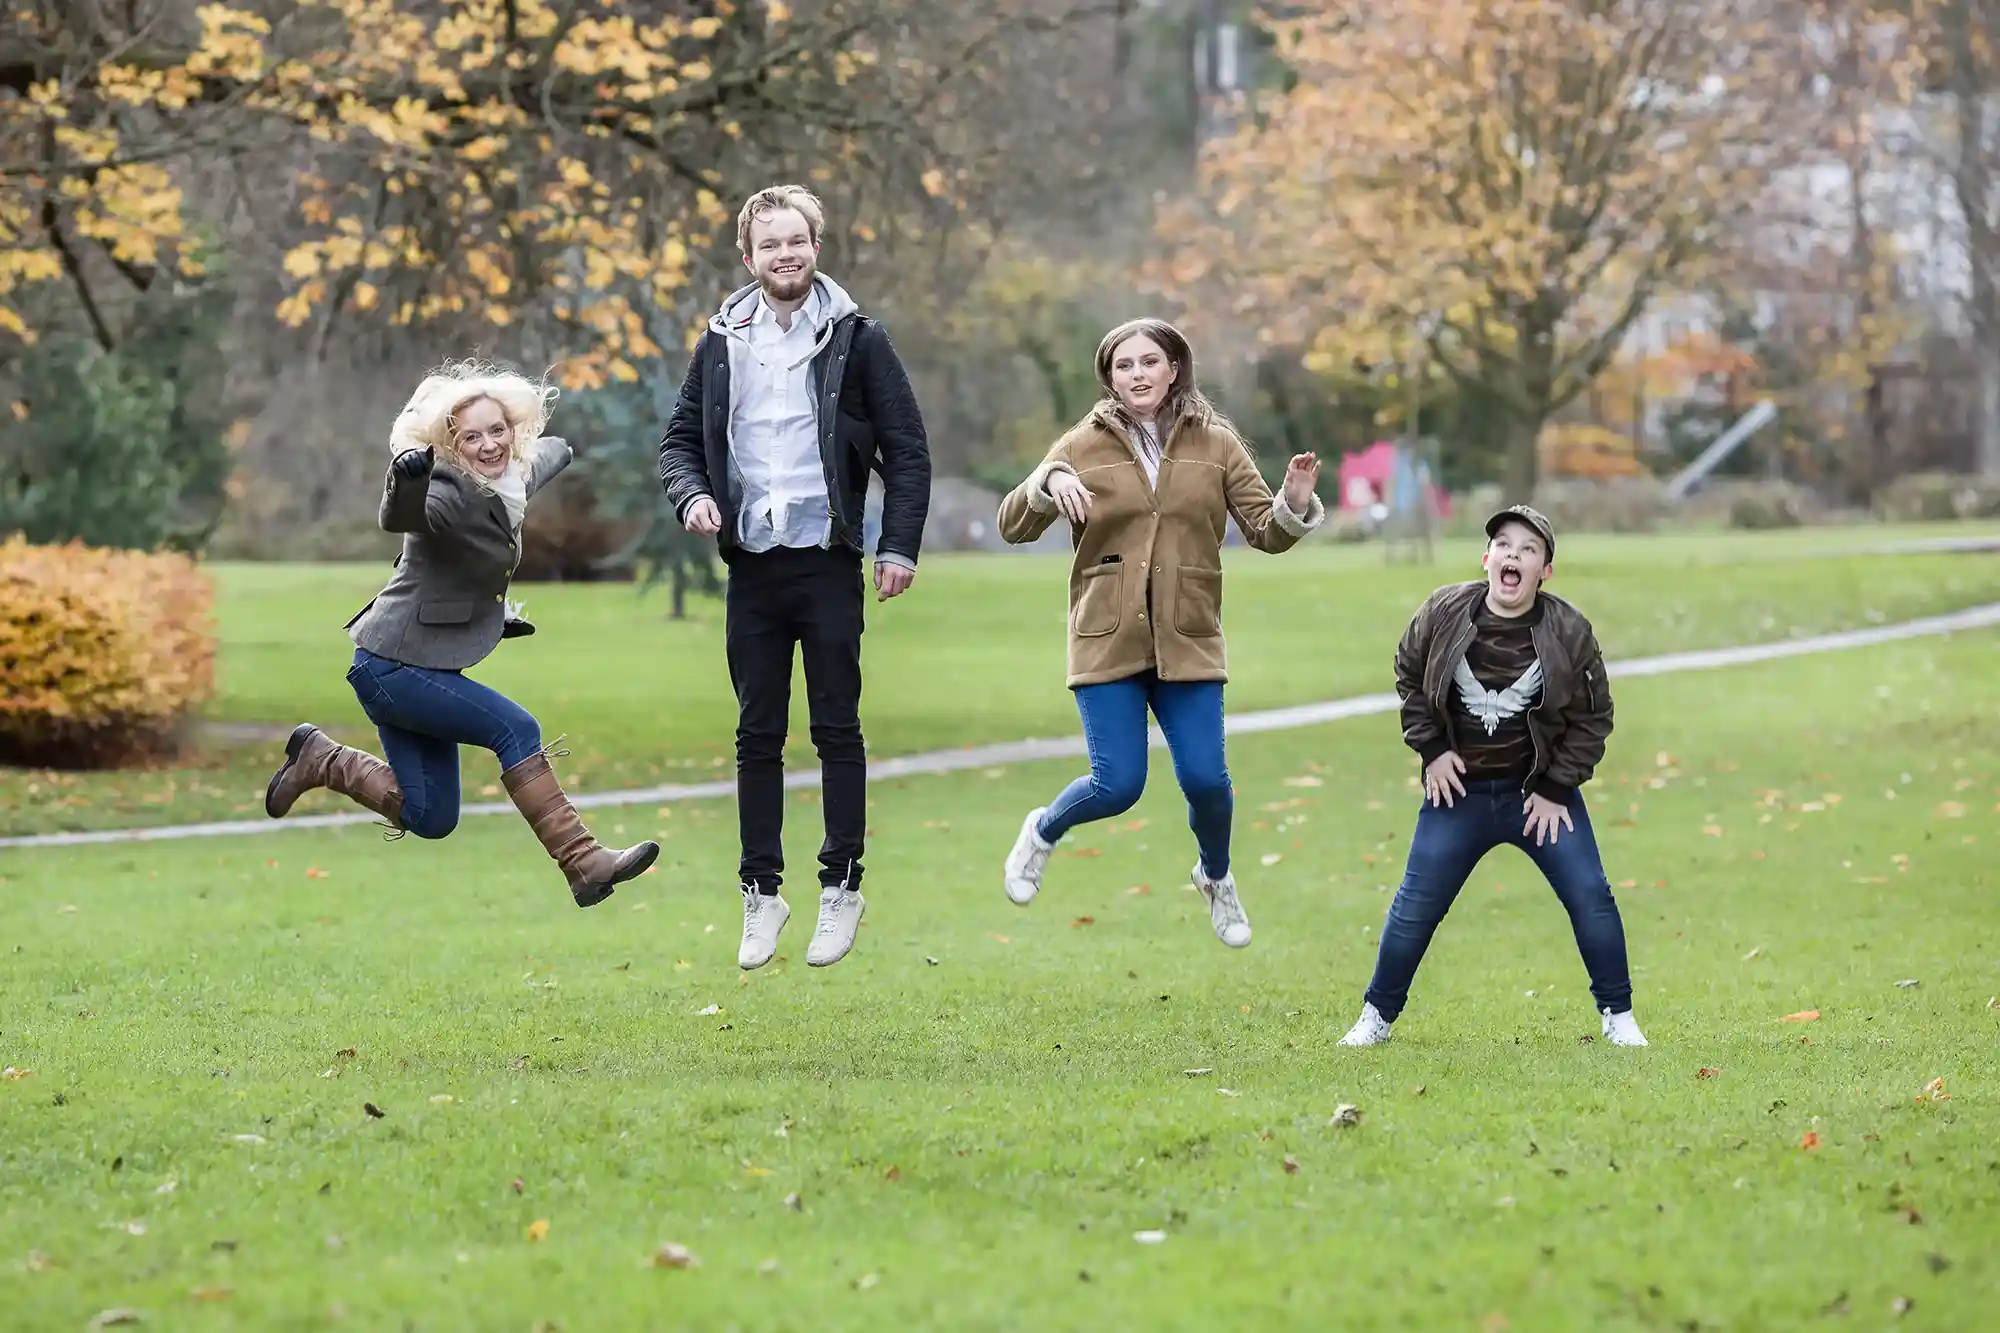 Four people jump in mid-air in a grassy park with autumn trees in the background. They are dressed in casual clothes and look cheerful.